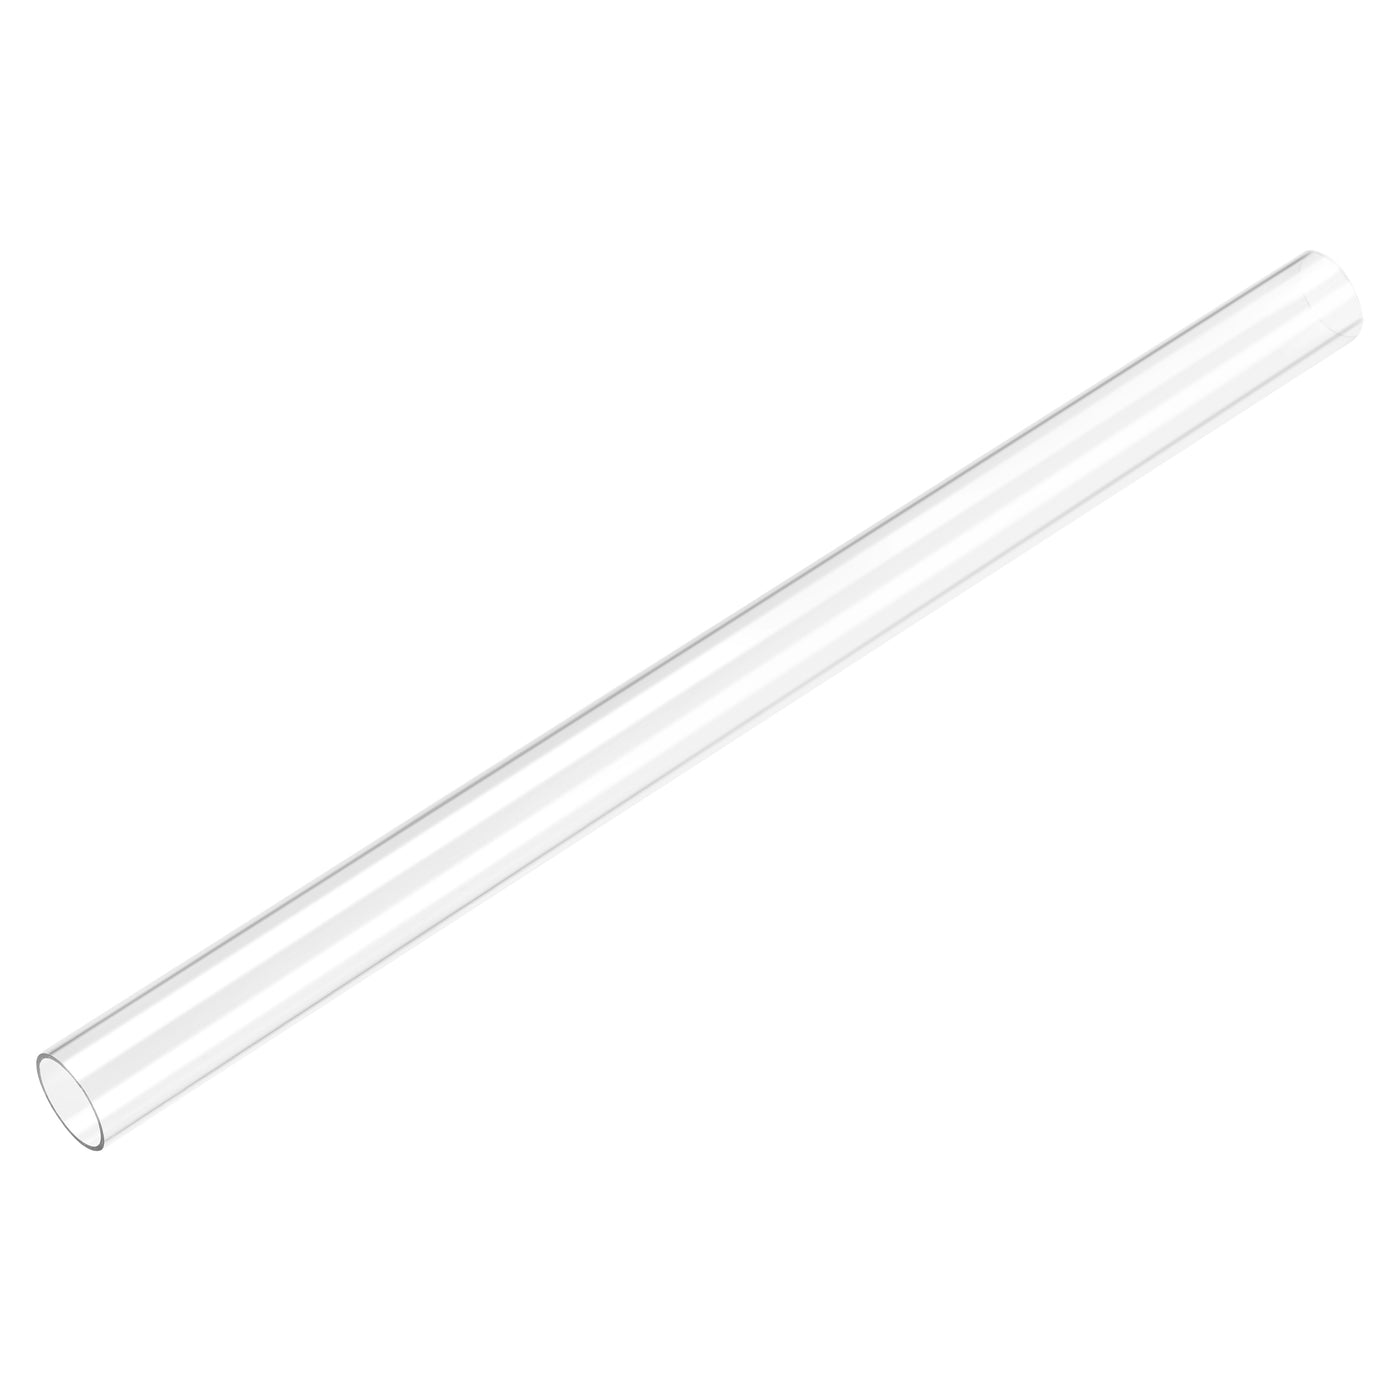 Uxcell Uxcell PC Rigid Round Clear Tubing 18mm(0.7 Inch)IDx20mm(0.79 Inch)ODx305mm(1Ft) Length Plastic Tube 3pcs